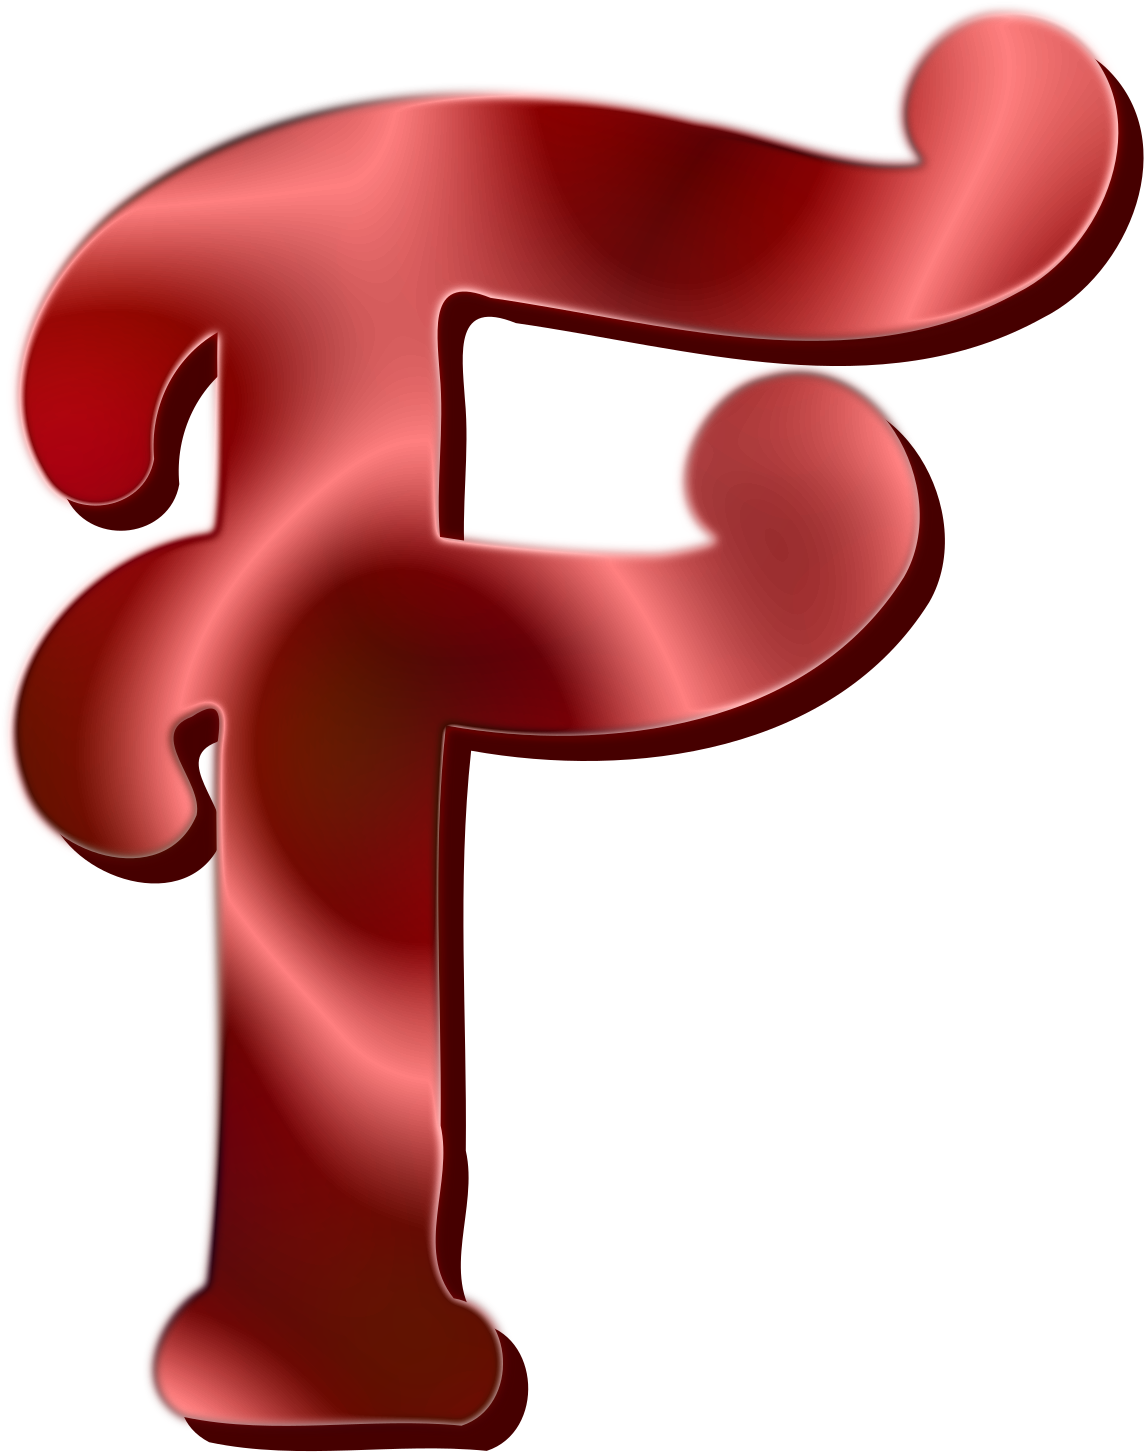 A Red Letter F On A Black Background